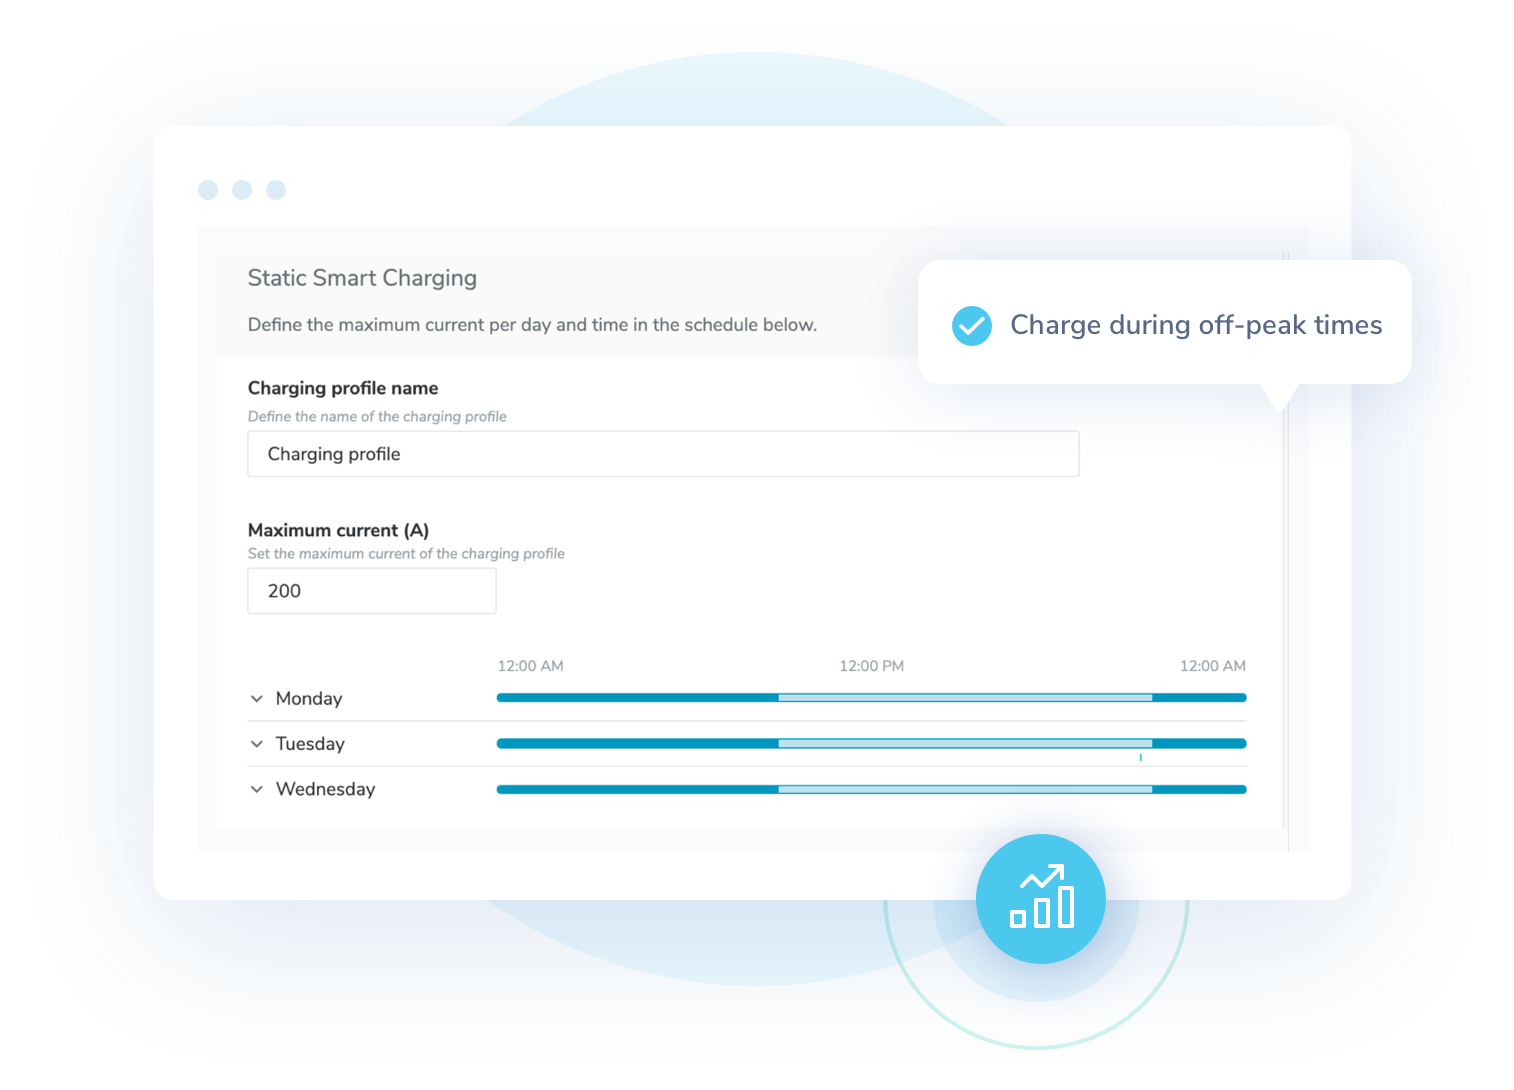 Optimize your charging schedule